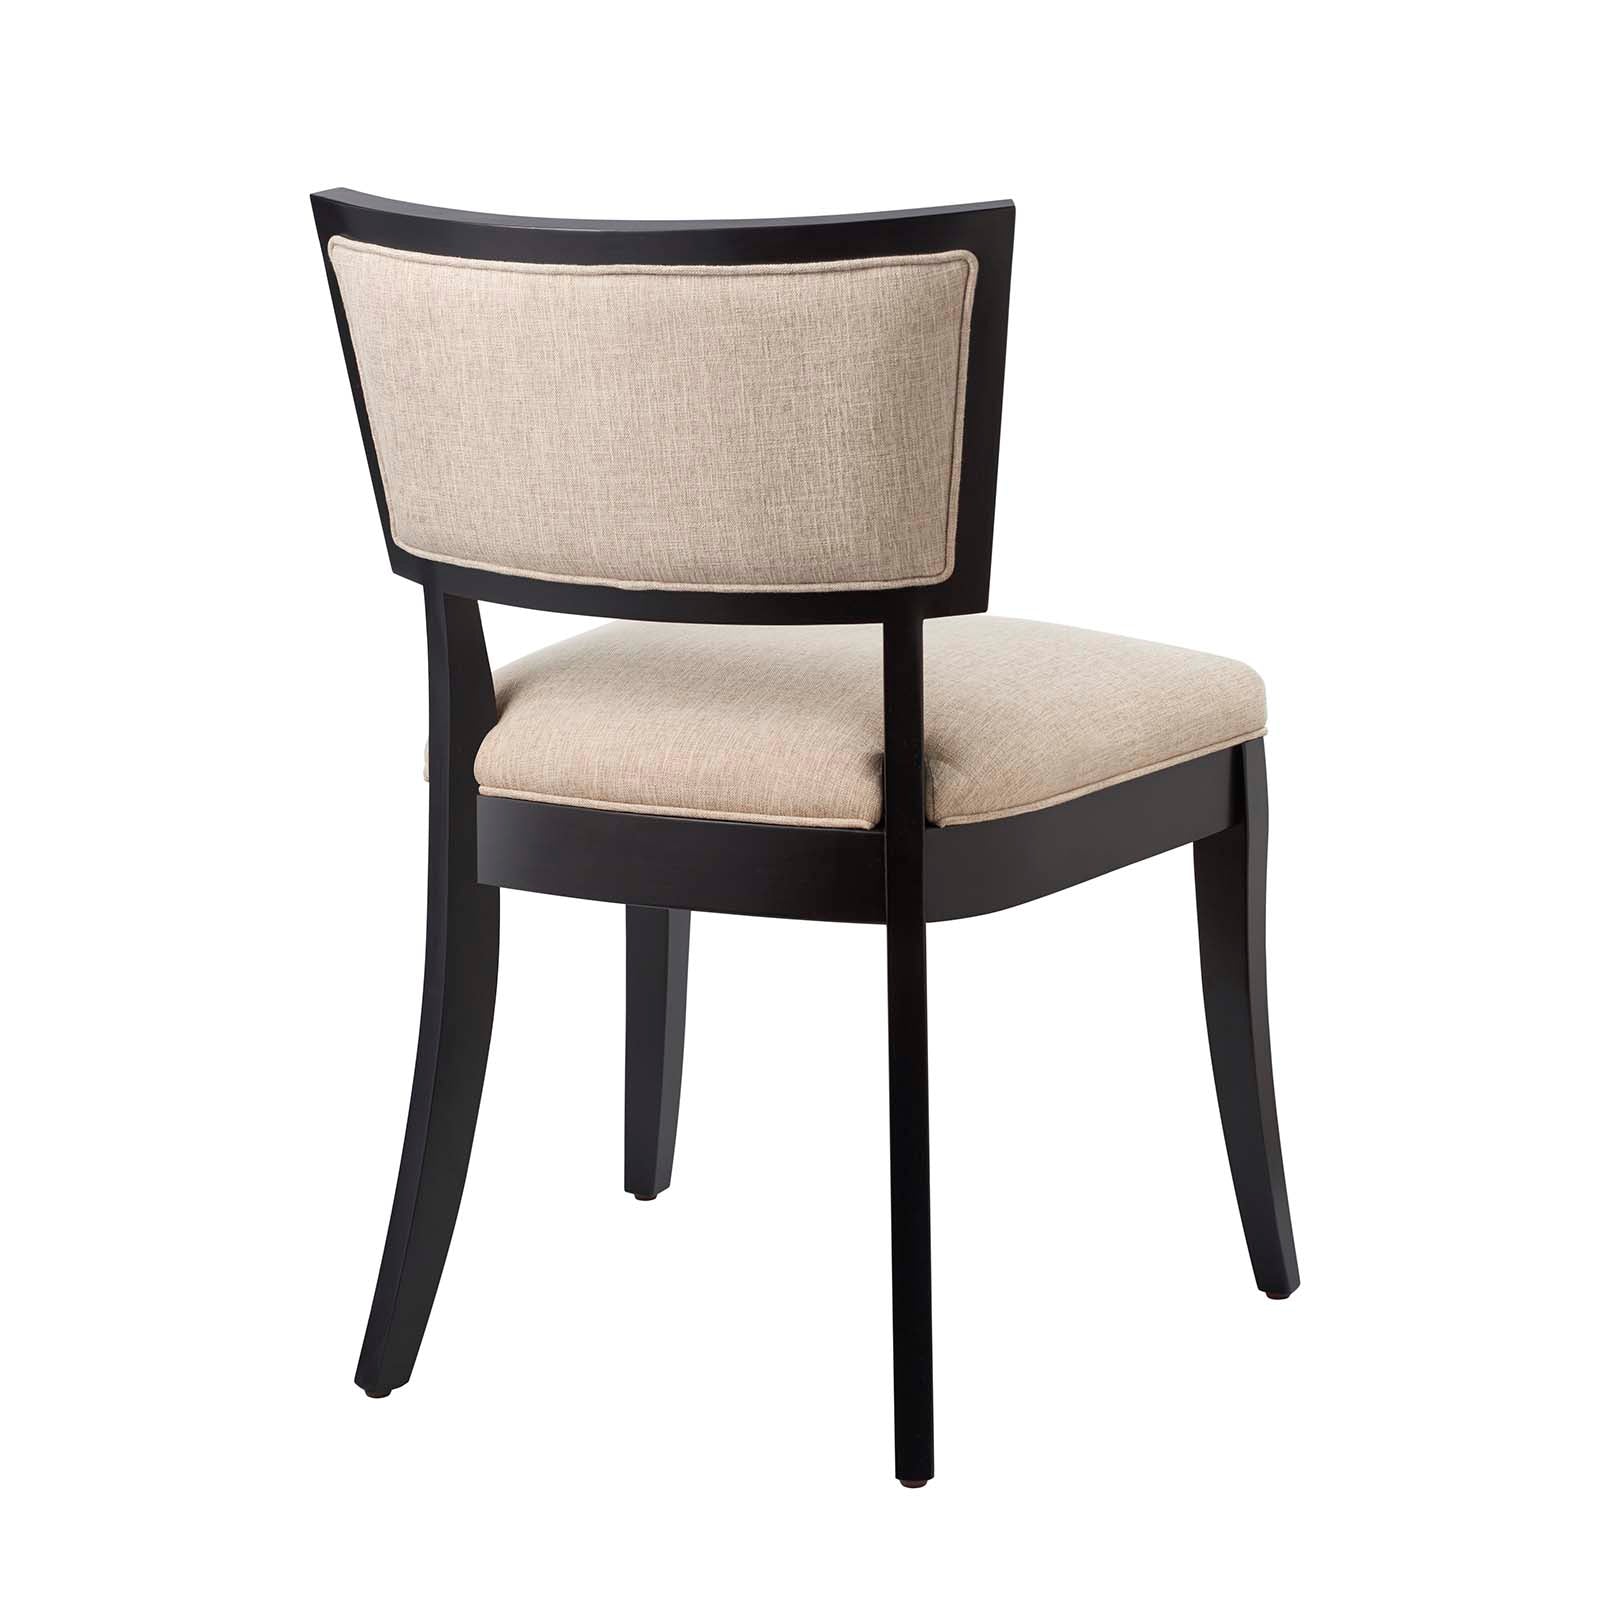 Pristine Upholstered Fabric Dining Chairs - Set of 2 - East Shore Modern Home Furnishings